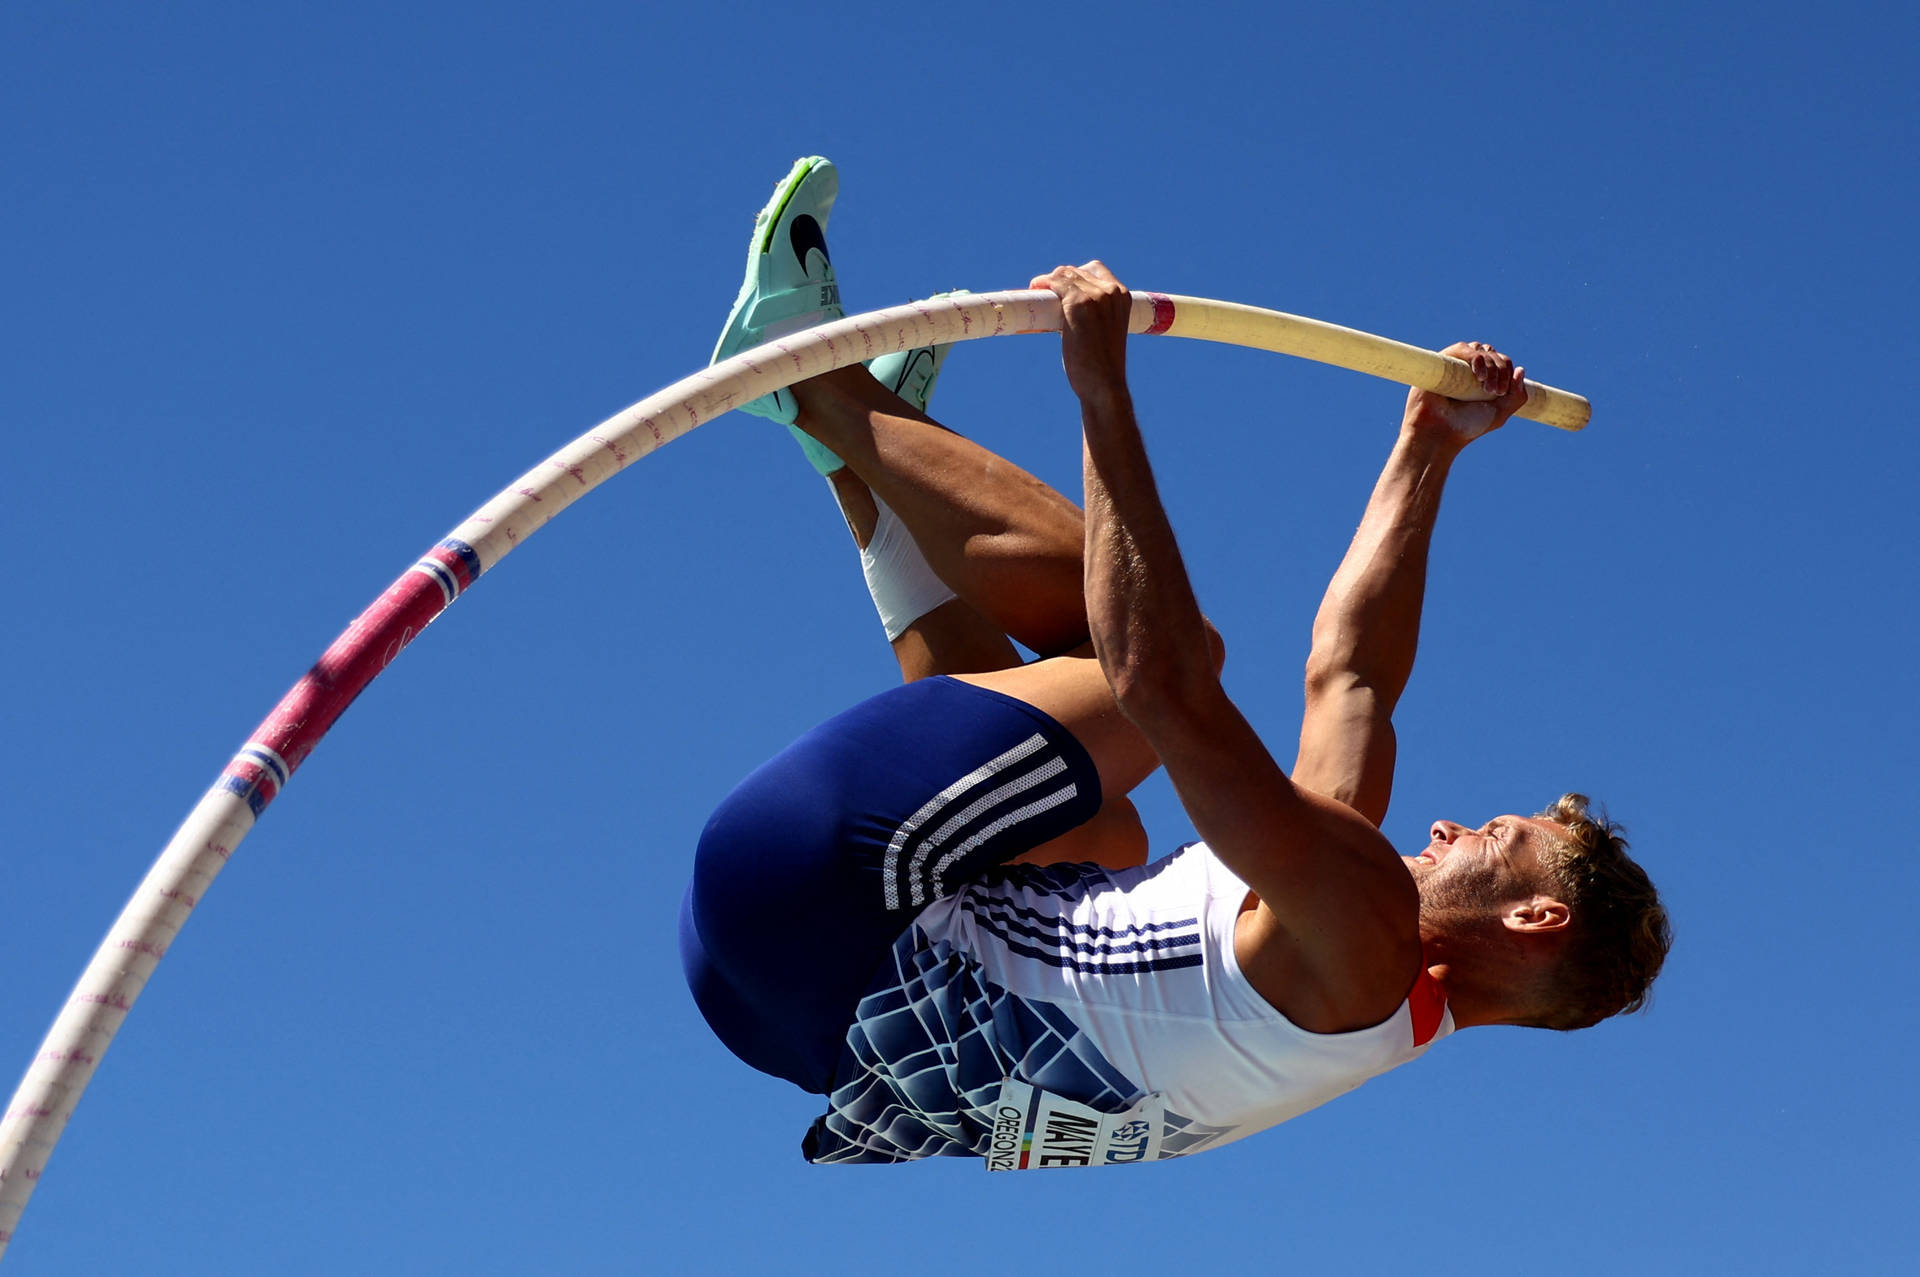 Kevin Mayer French Pole Vault Athlete Wallpaper